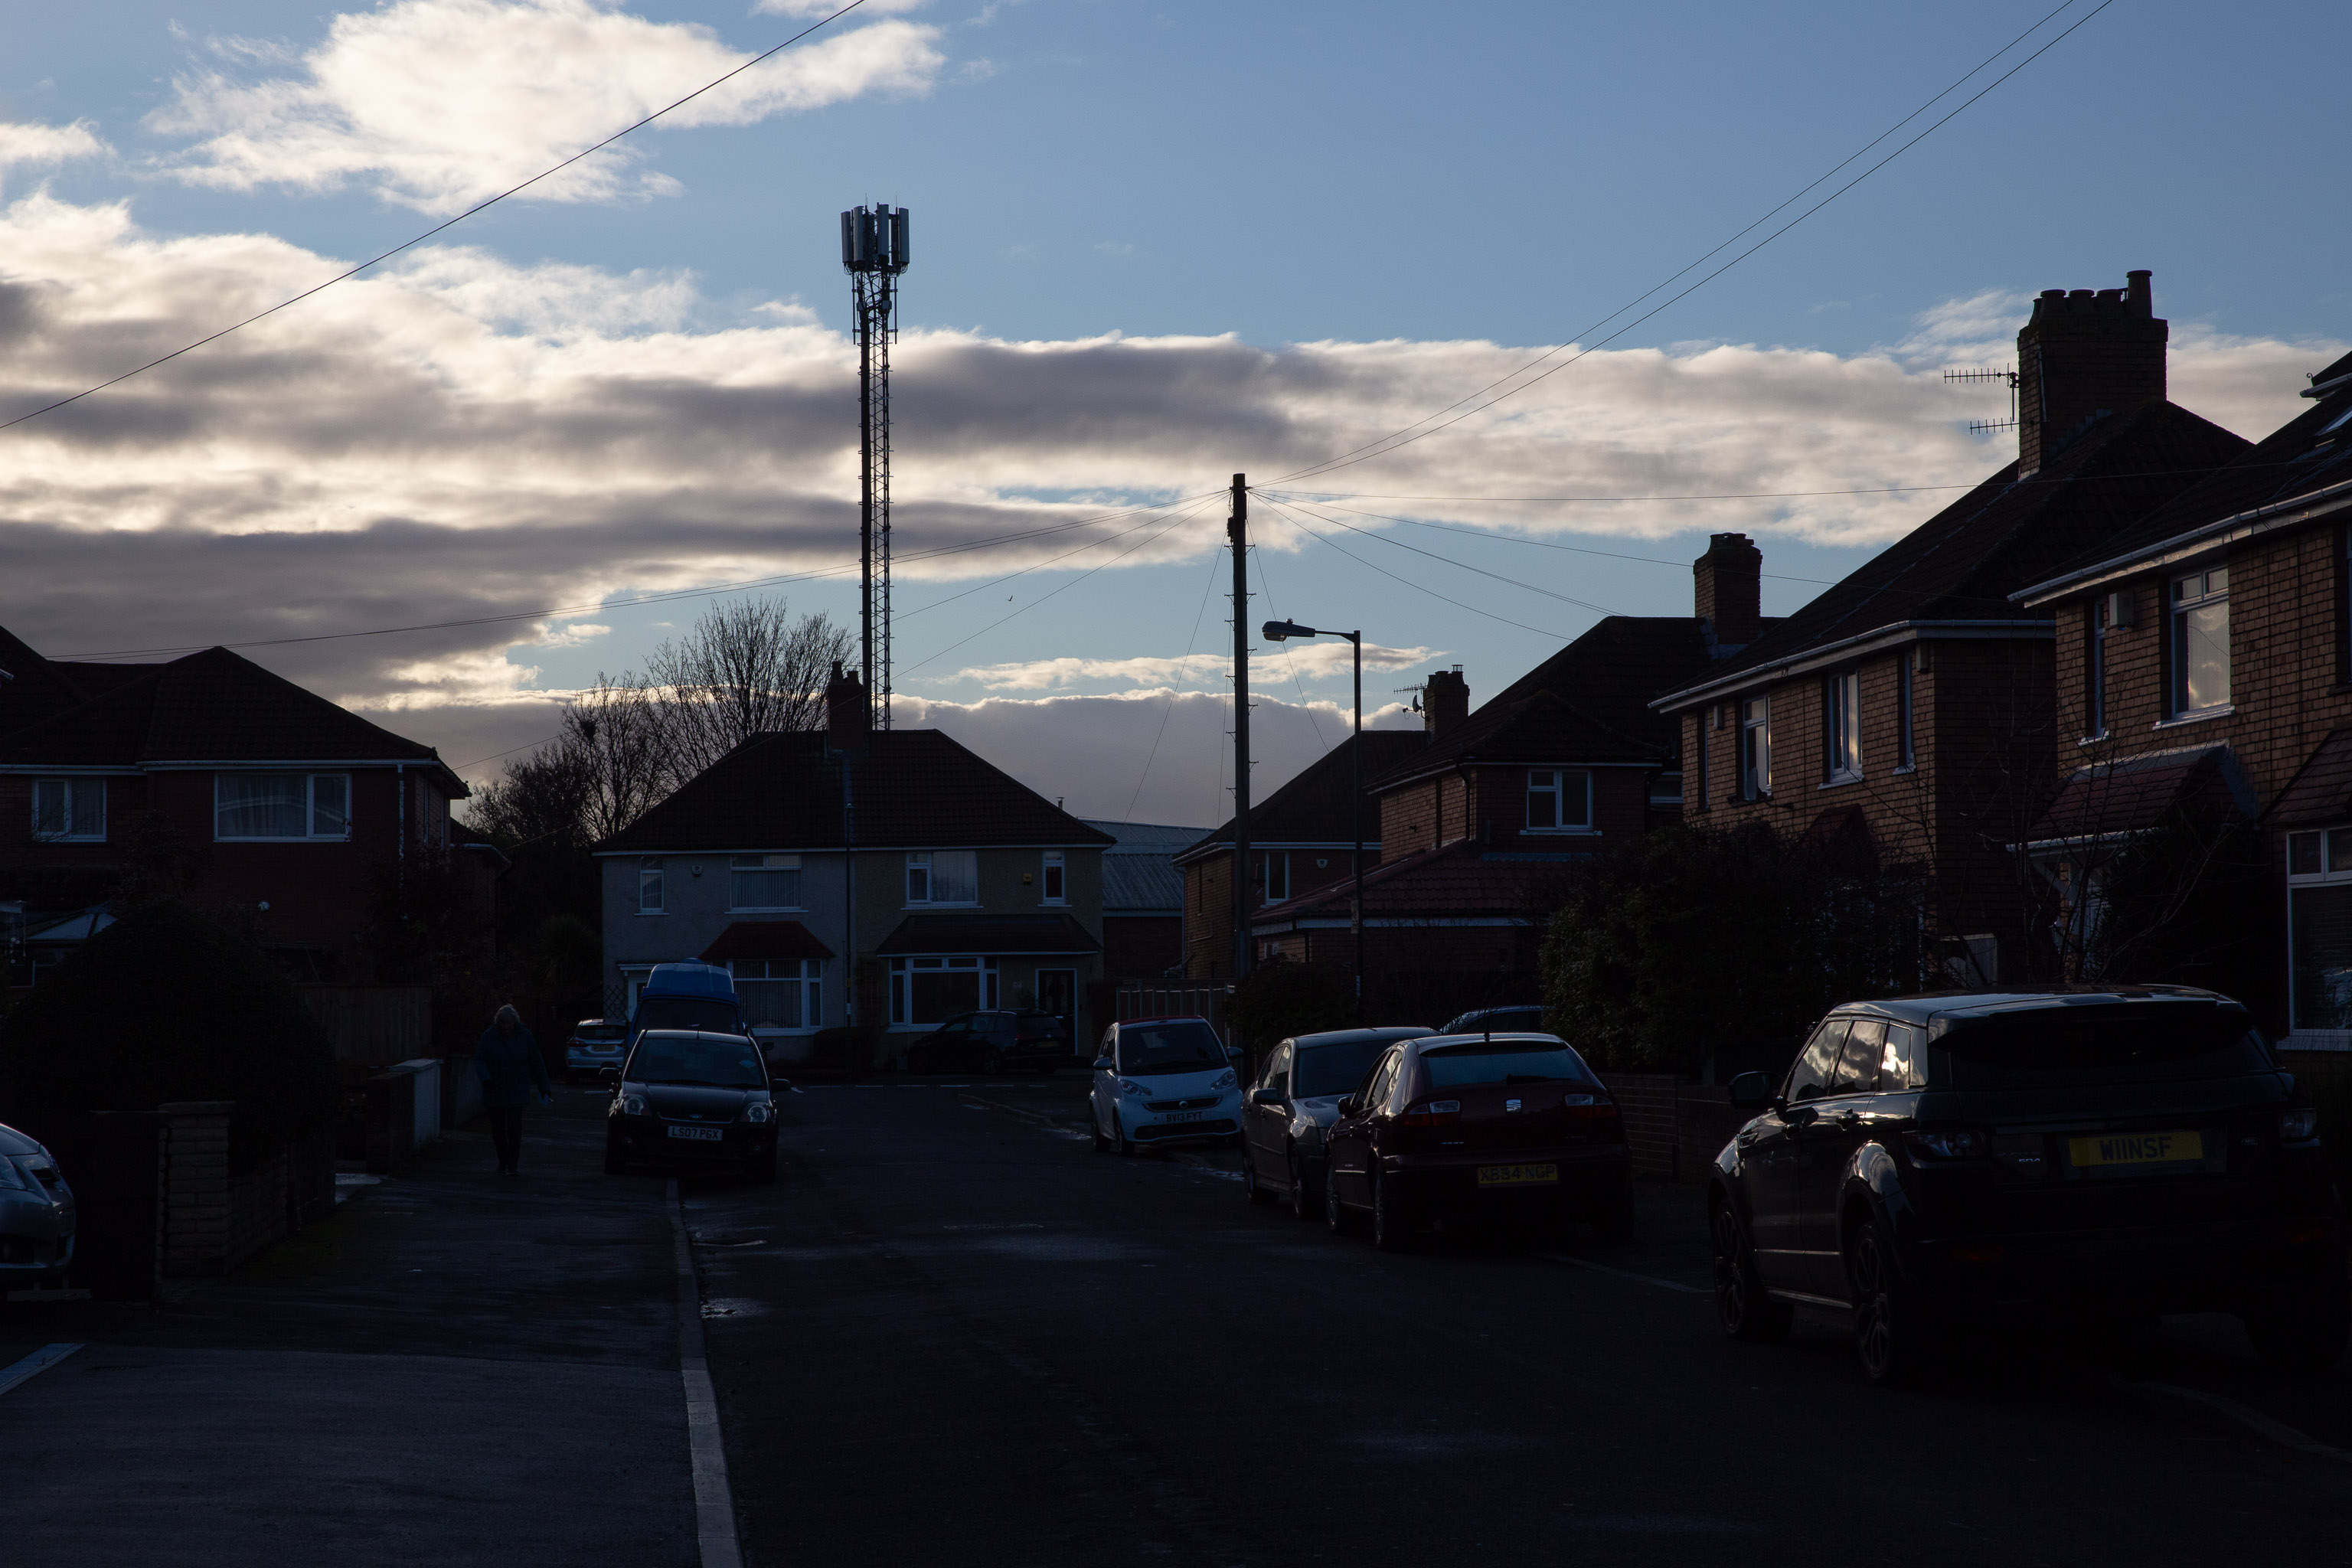 Mast
Fury as huge phone mast is erected without planning permission just a few feet from residents' homes, according to the Evening Post.
